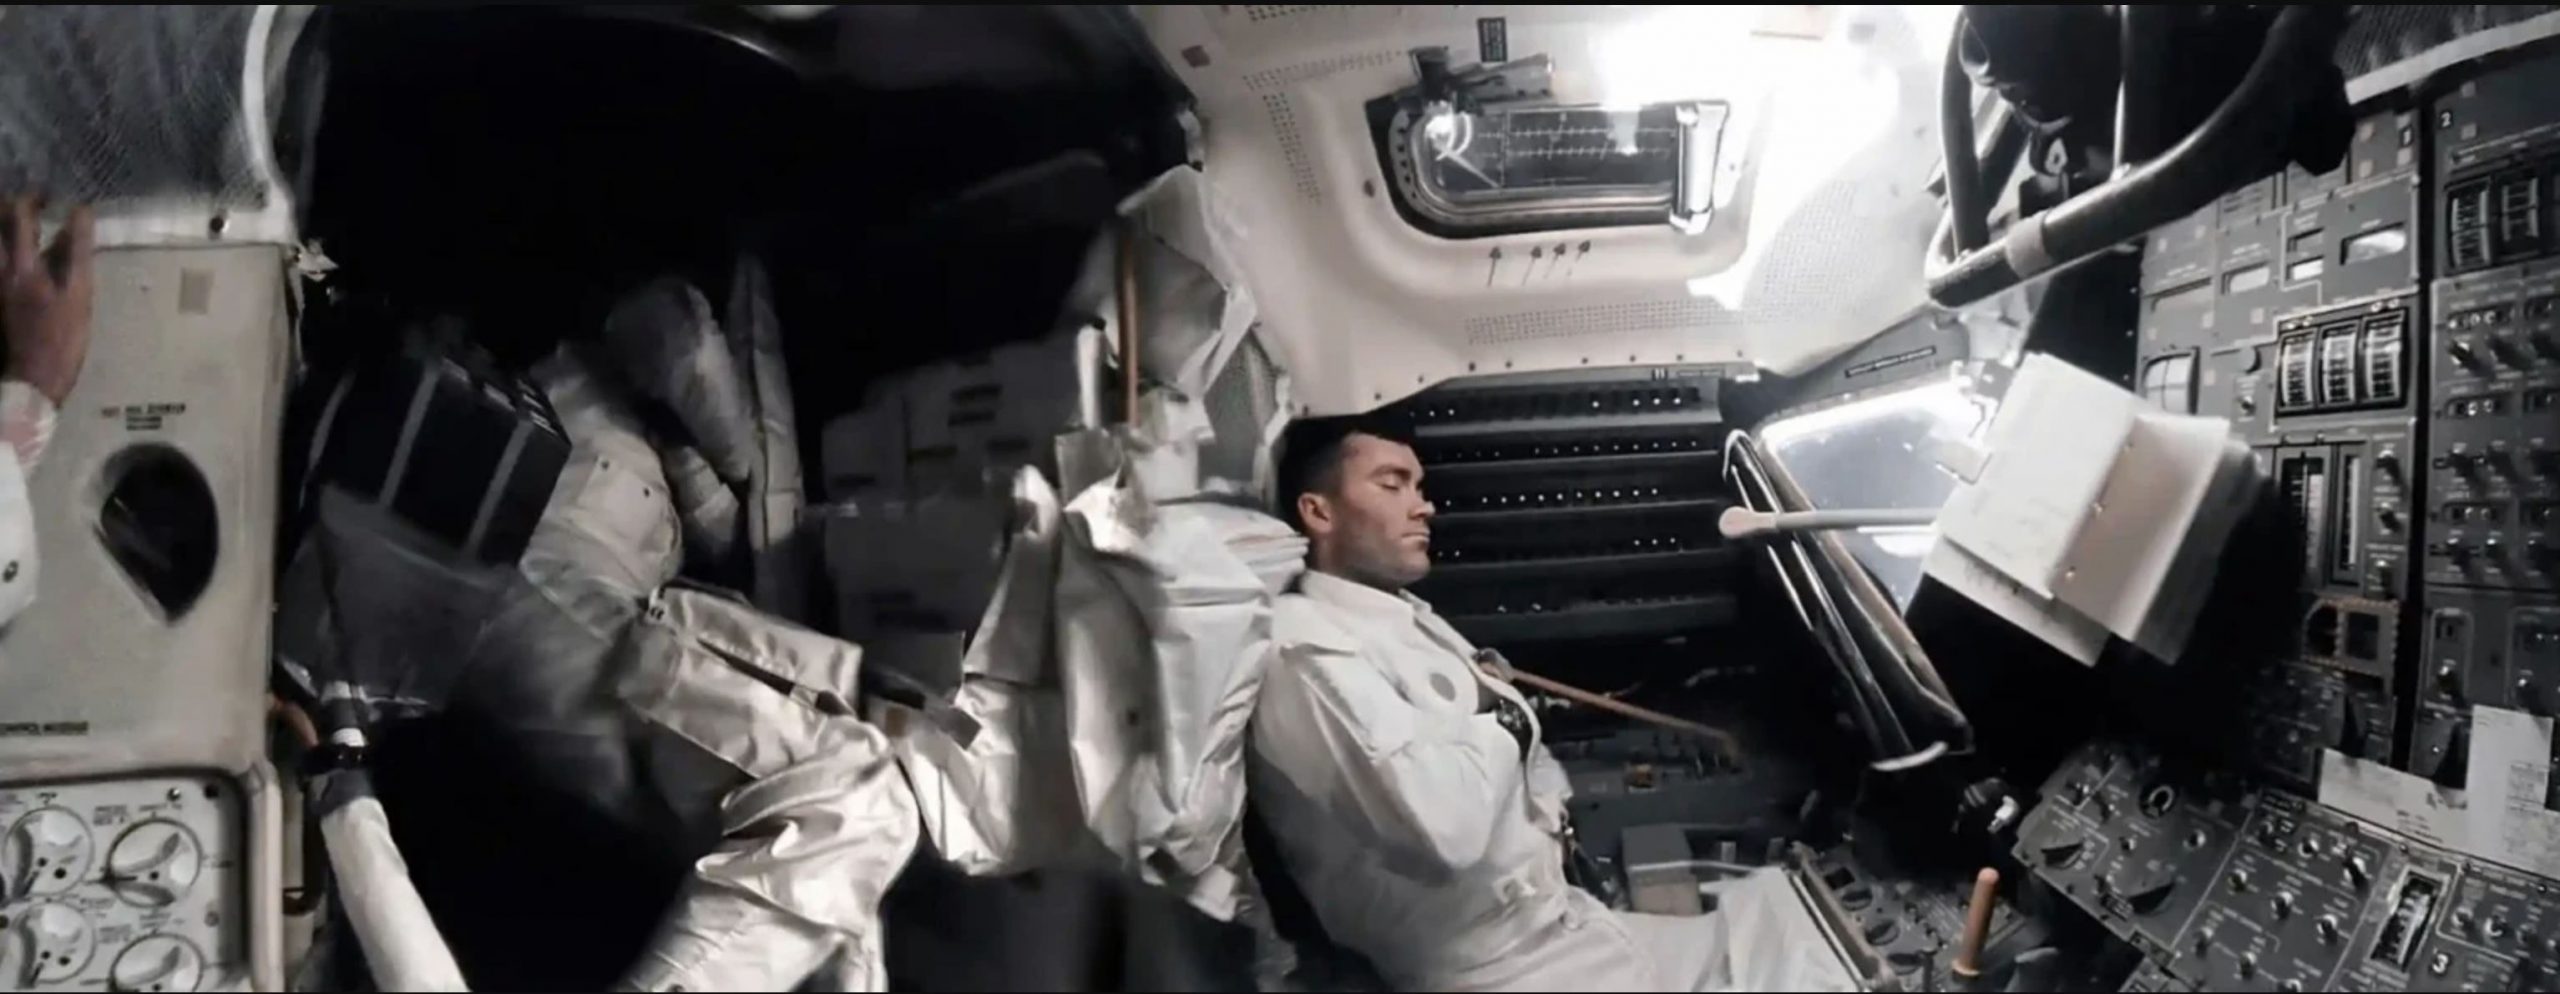 Fred Haise sleeps in the cold lunar module. Apollo 13, April 15 1970. Image Credit: Nasa/JSC/ASU/Andy Saunders.